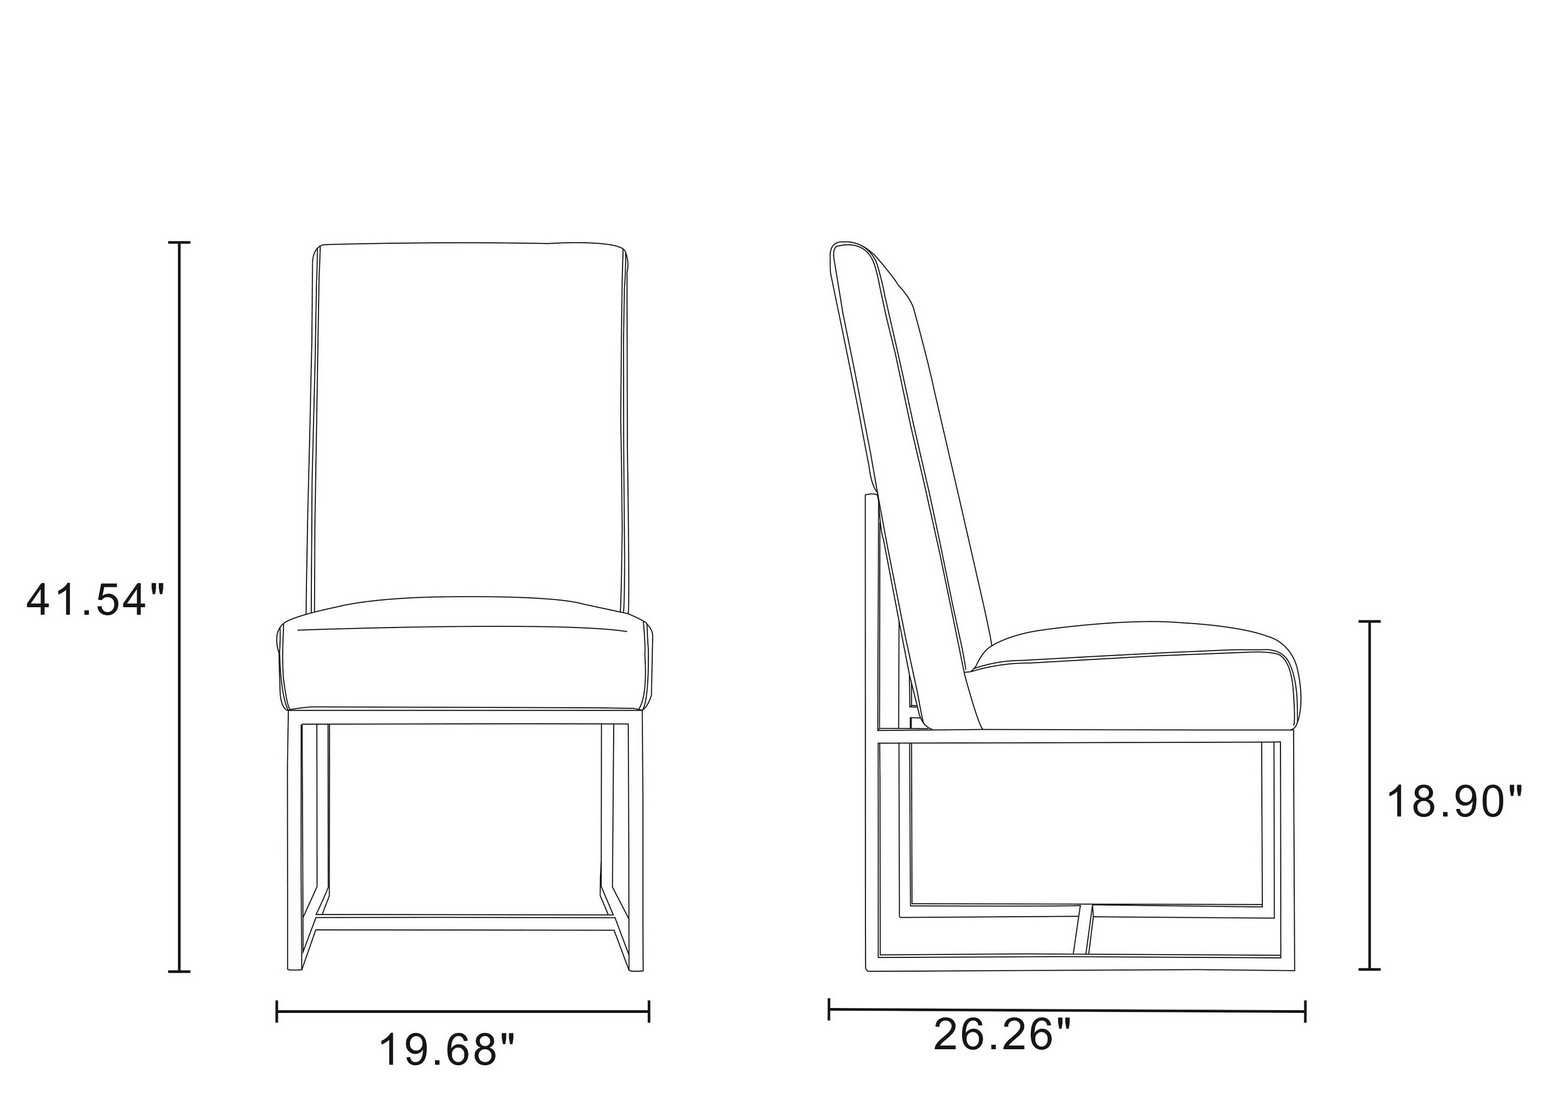 Weight and Dimension (Length, Depth, Width, Height) of Mondella Hella Dining Chair from Dining Table Mart (MON046201 / MON046202 / MON046203)